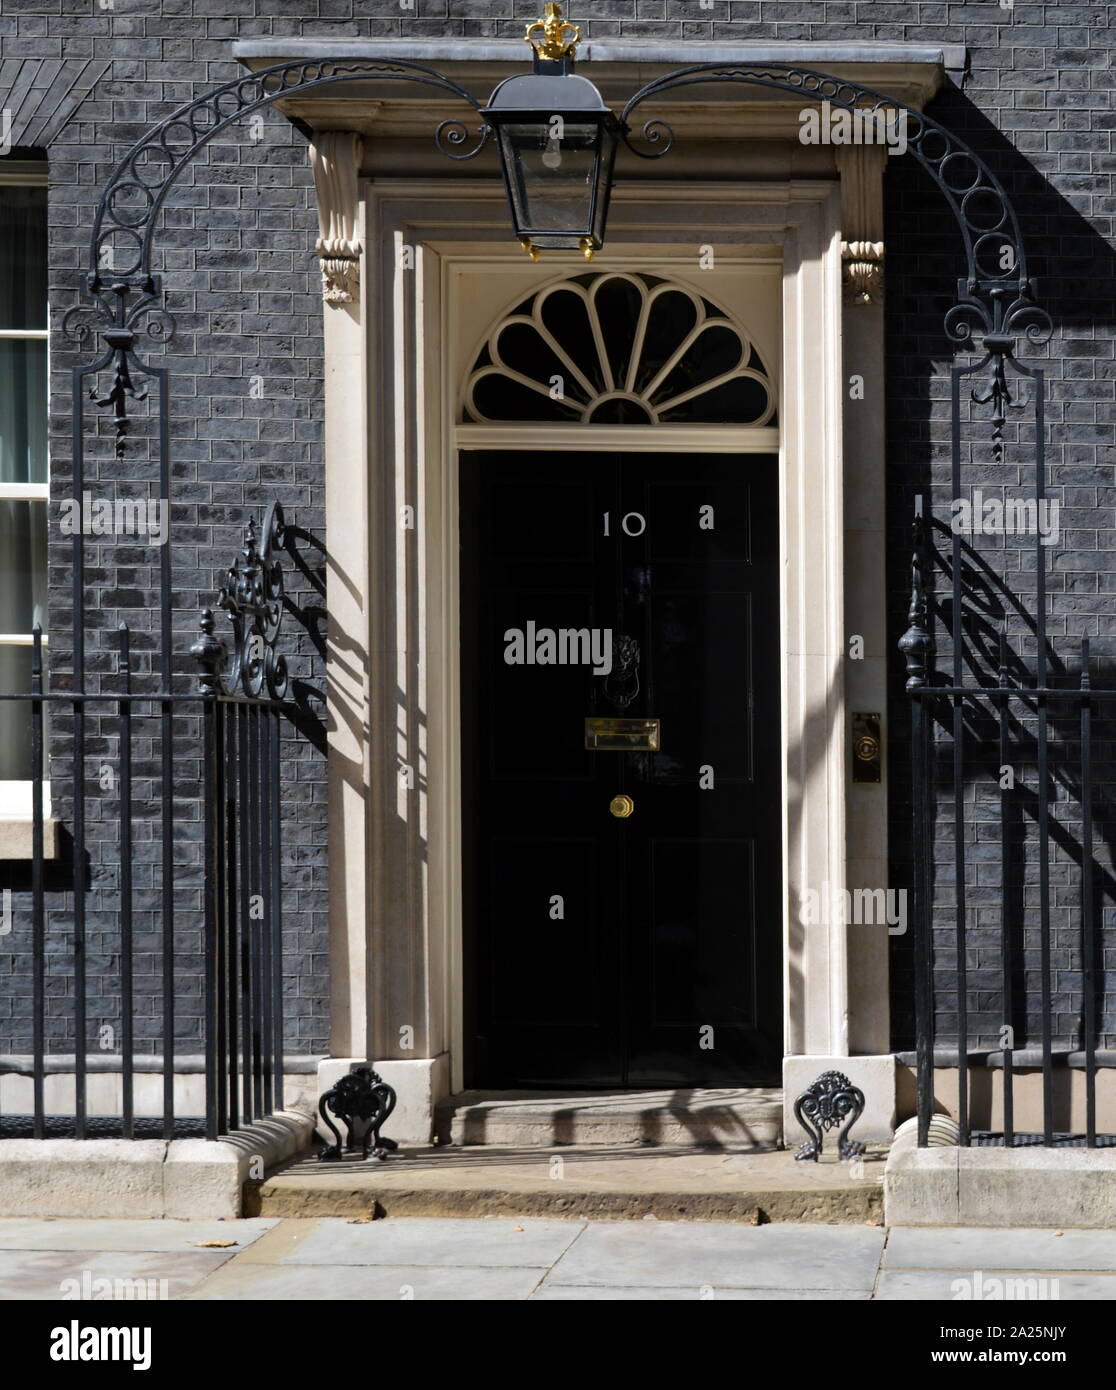 Downing street, london, houses the official residences and offices of the  prime minister of the united kingdom and the chancellor of the exchequer.  situated off whitehall, a few minutes' walk from the